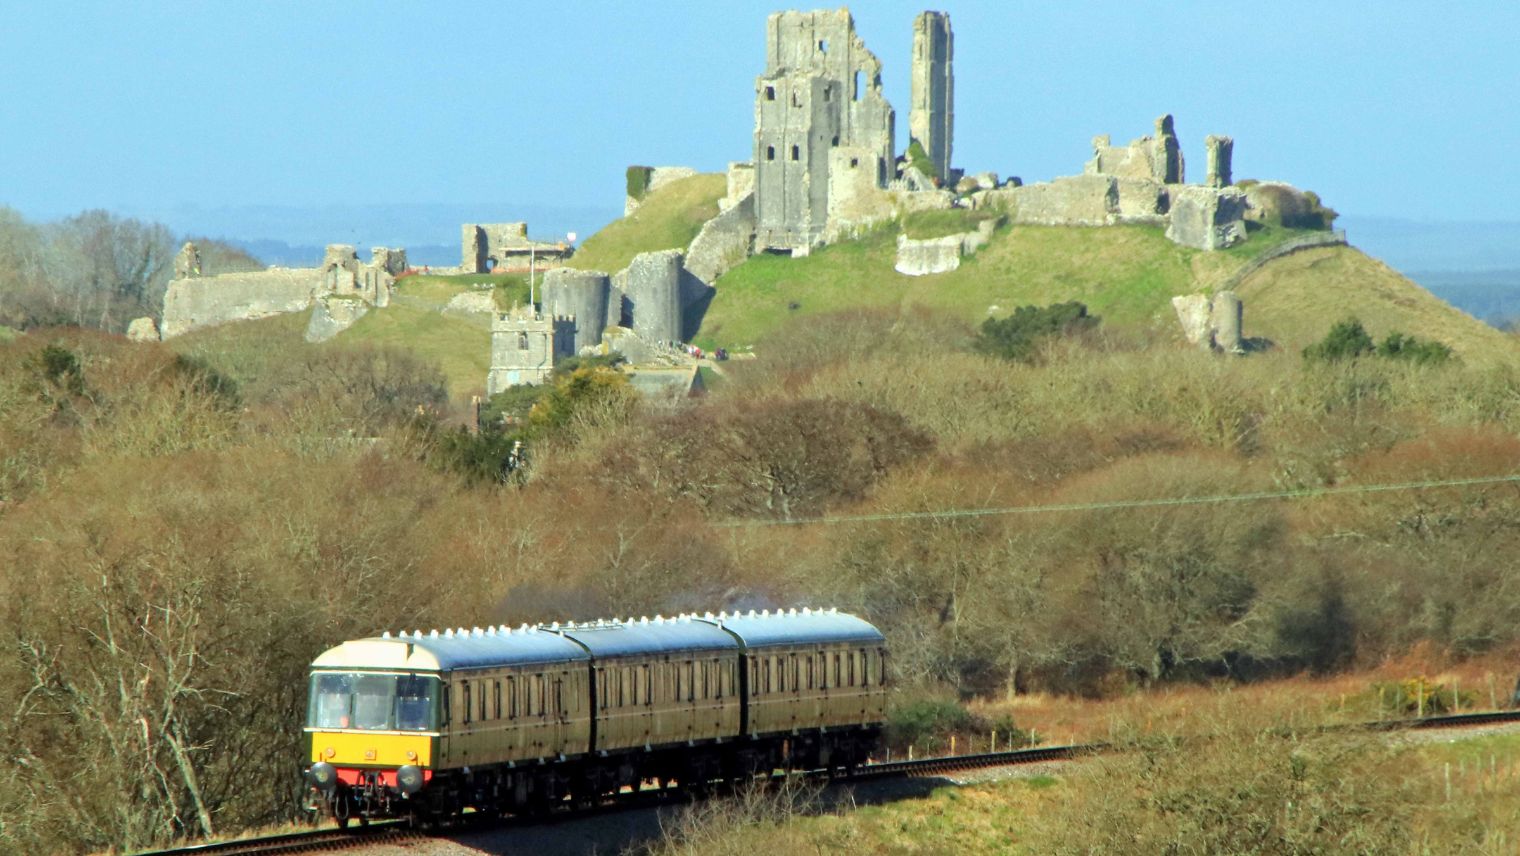 A passenger train running on the Swanage Railway line with Corfe Castle in the background - South Western Railway